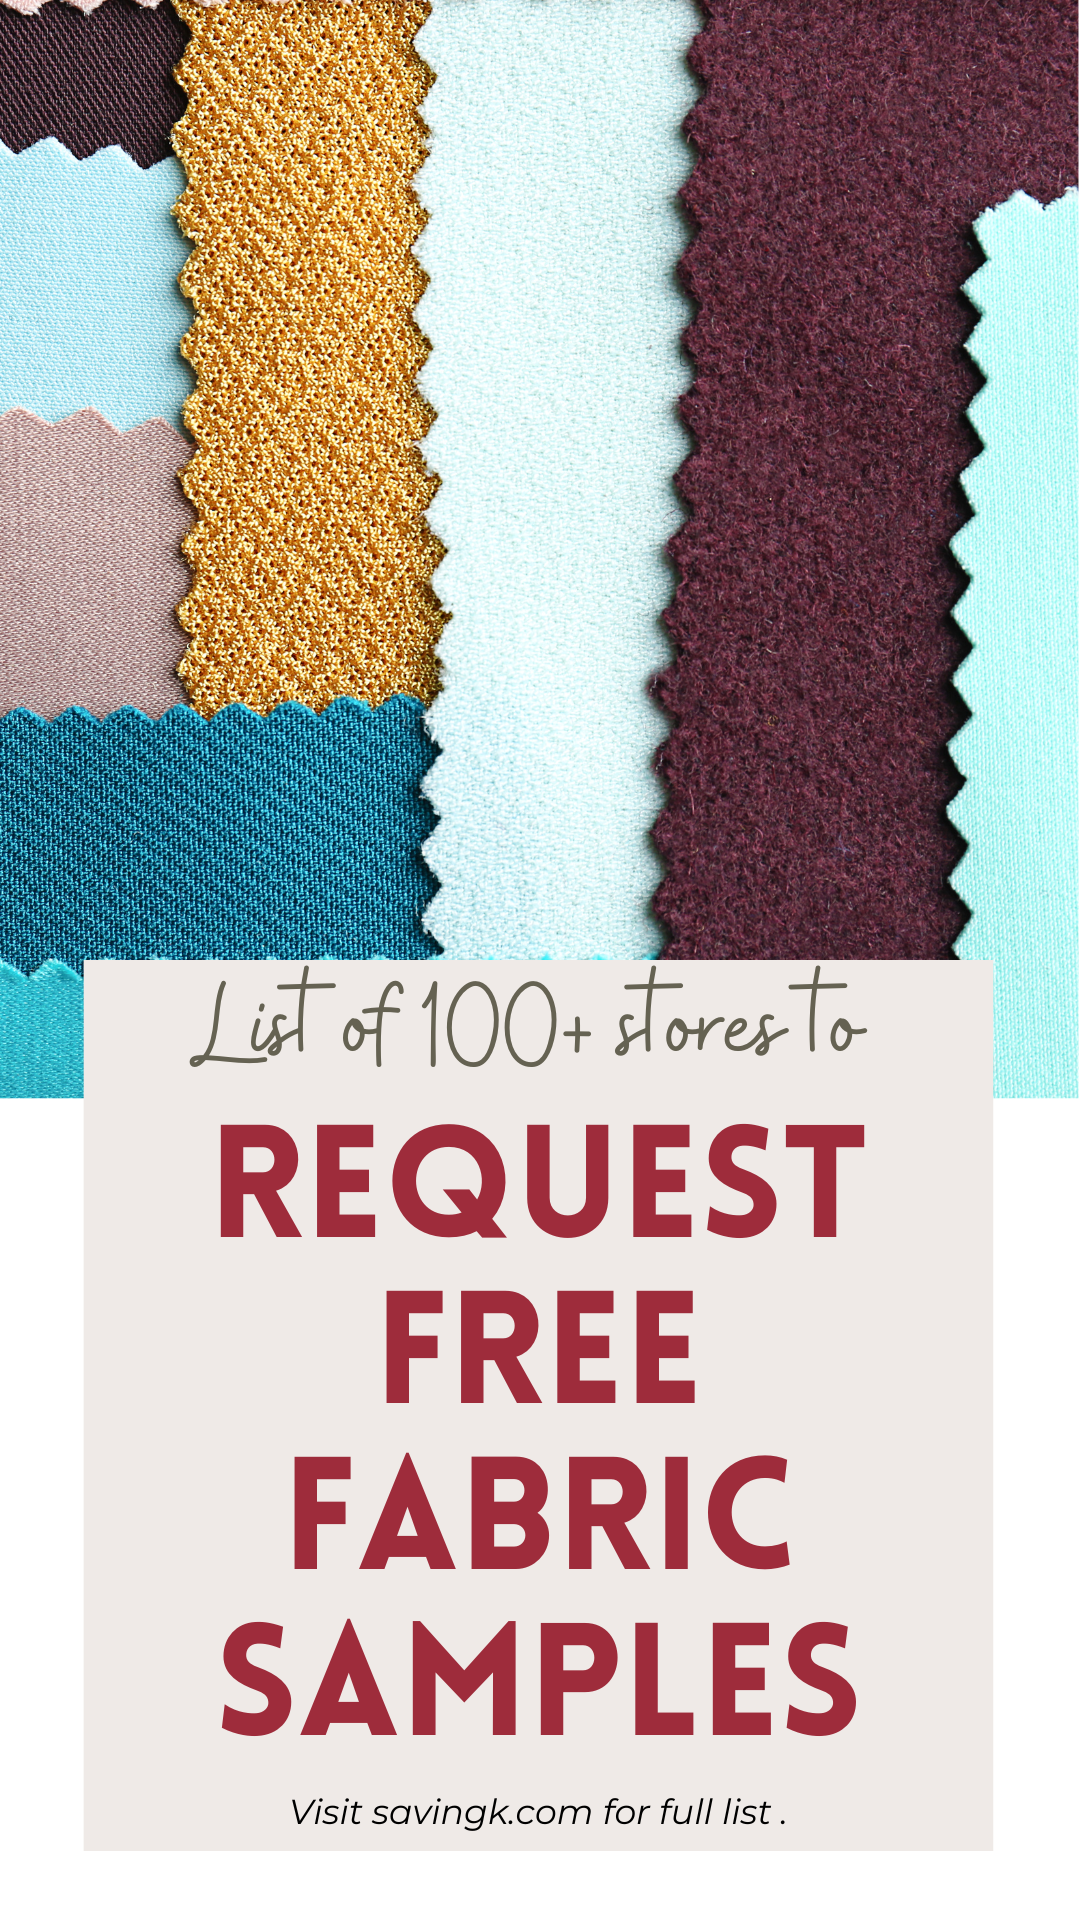 Where to Request Free Fabric Samples